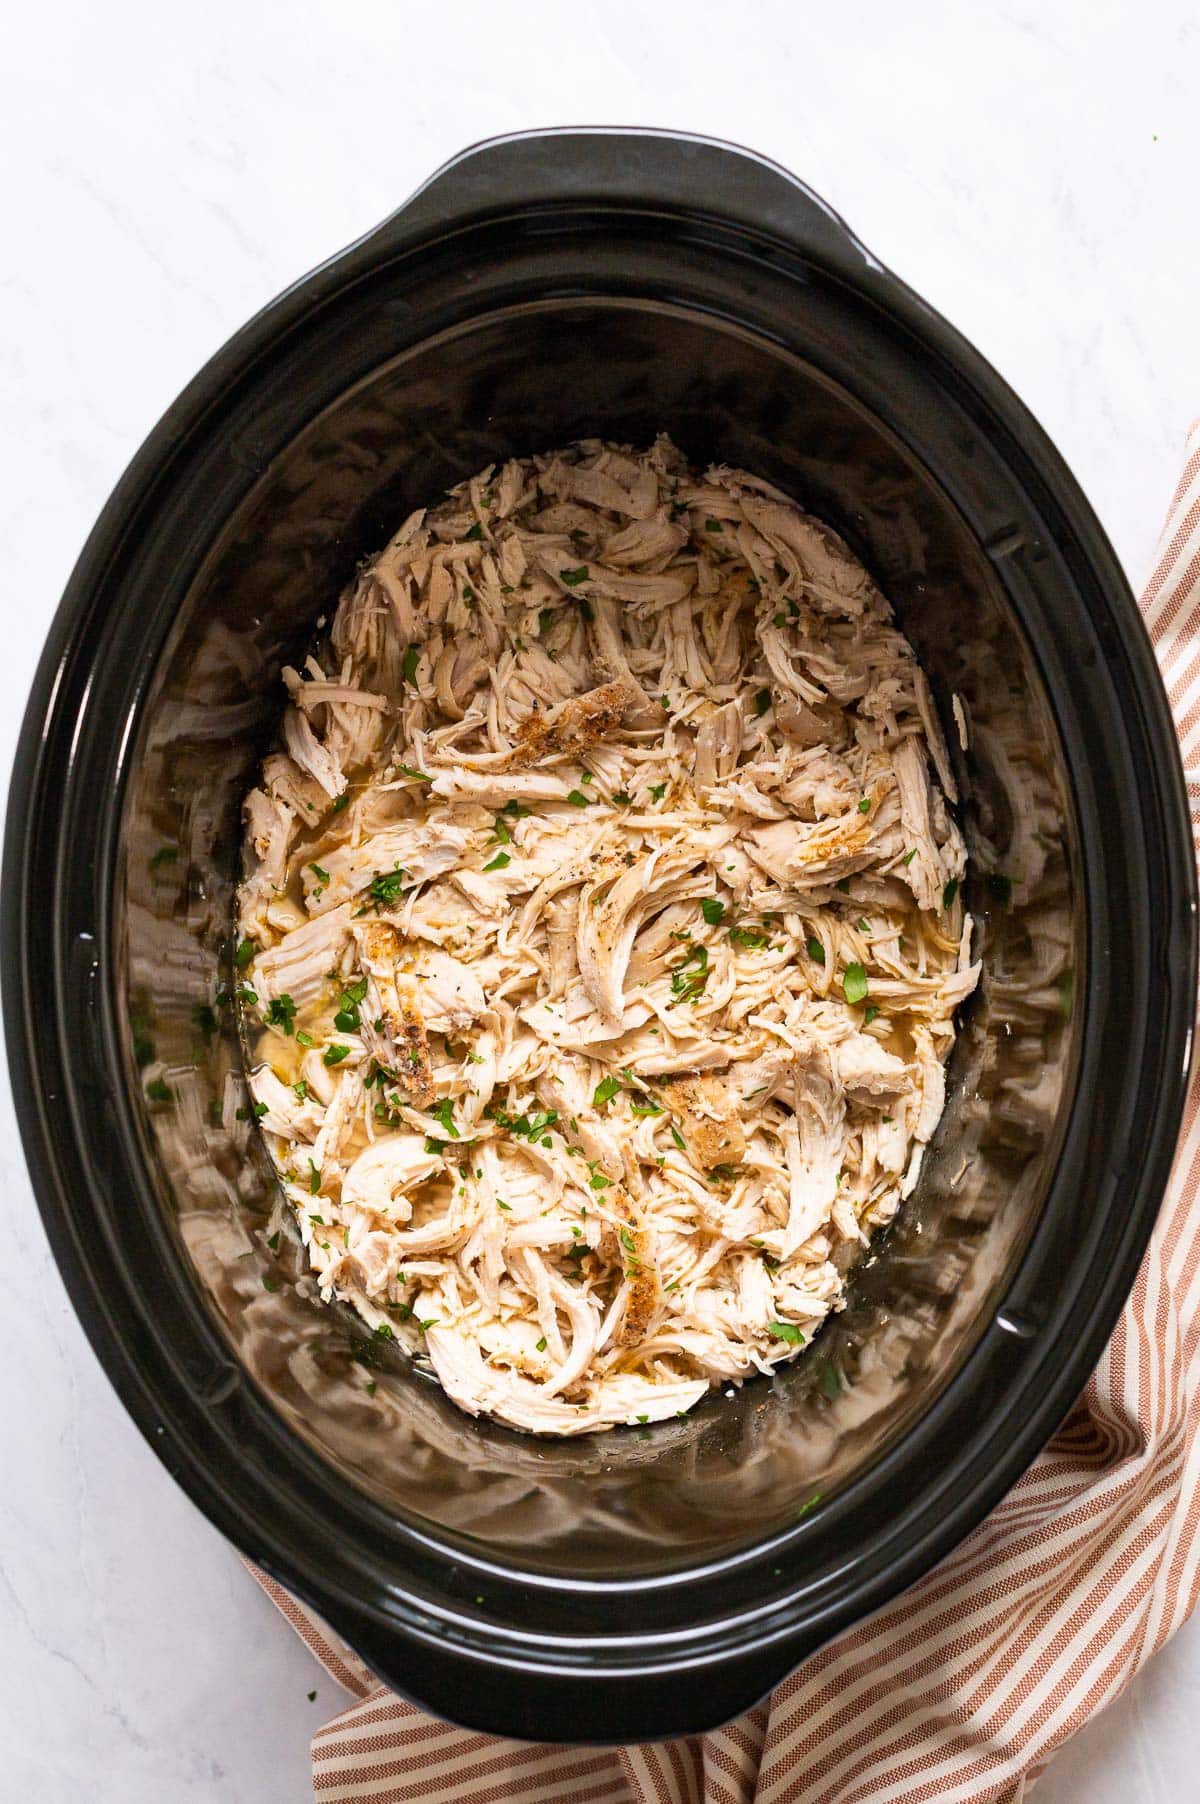 Shredded chicken in broth garnished with herbs in black slow cooker.